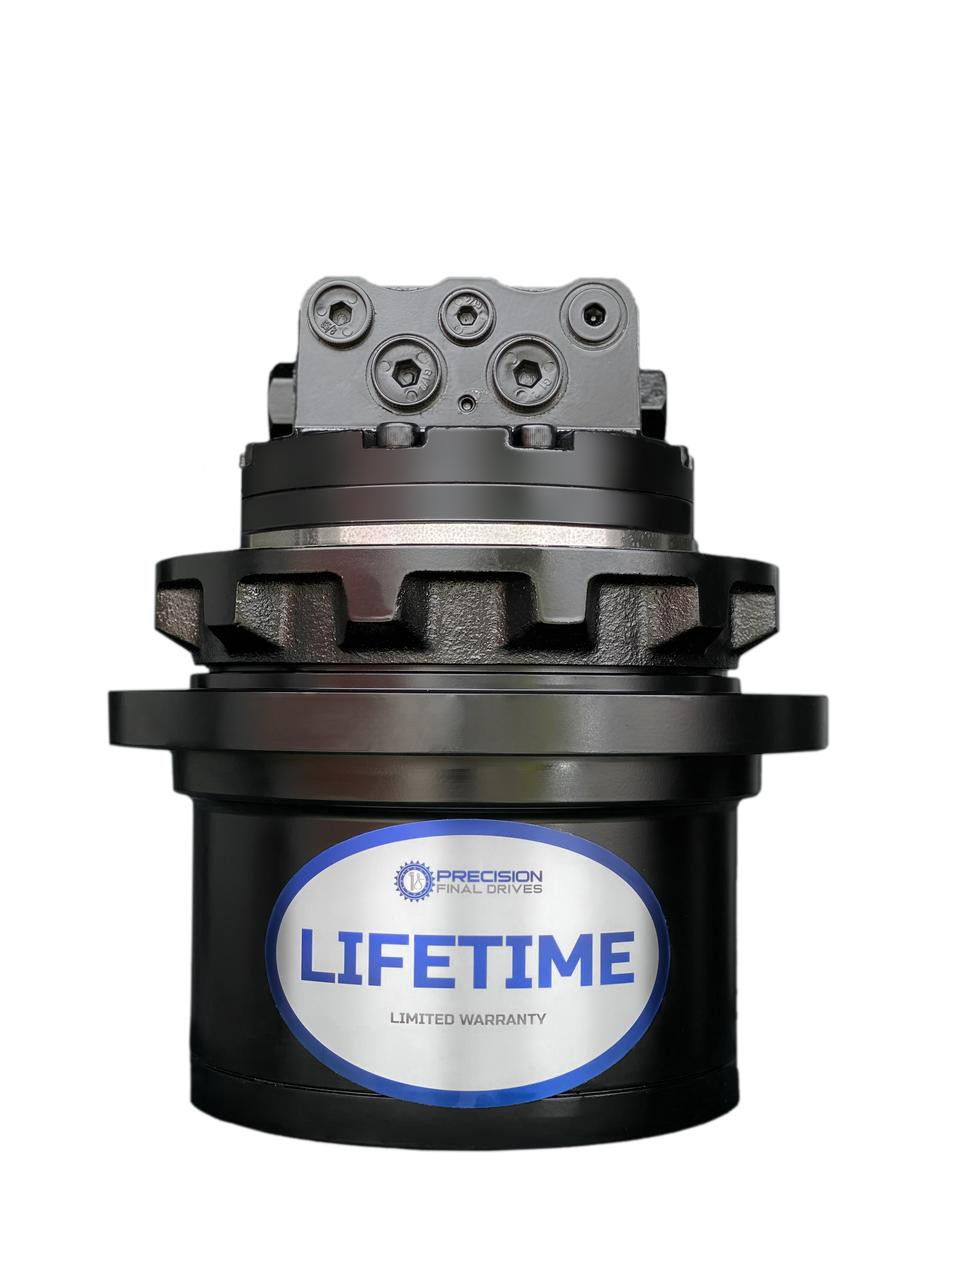 New Holland EH80 Final Drive Travel Motor